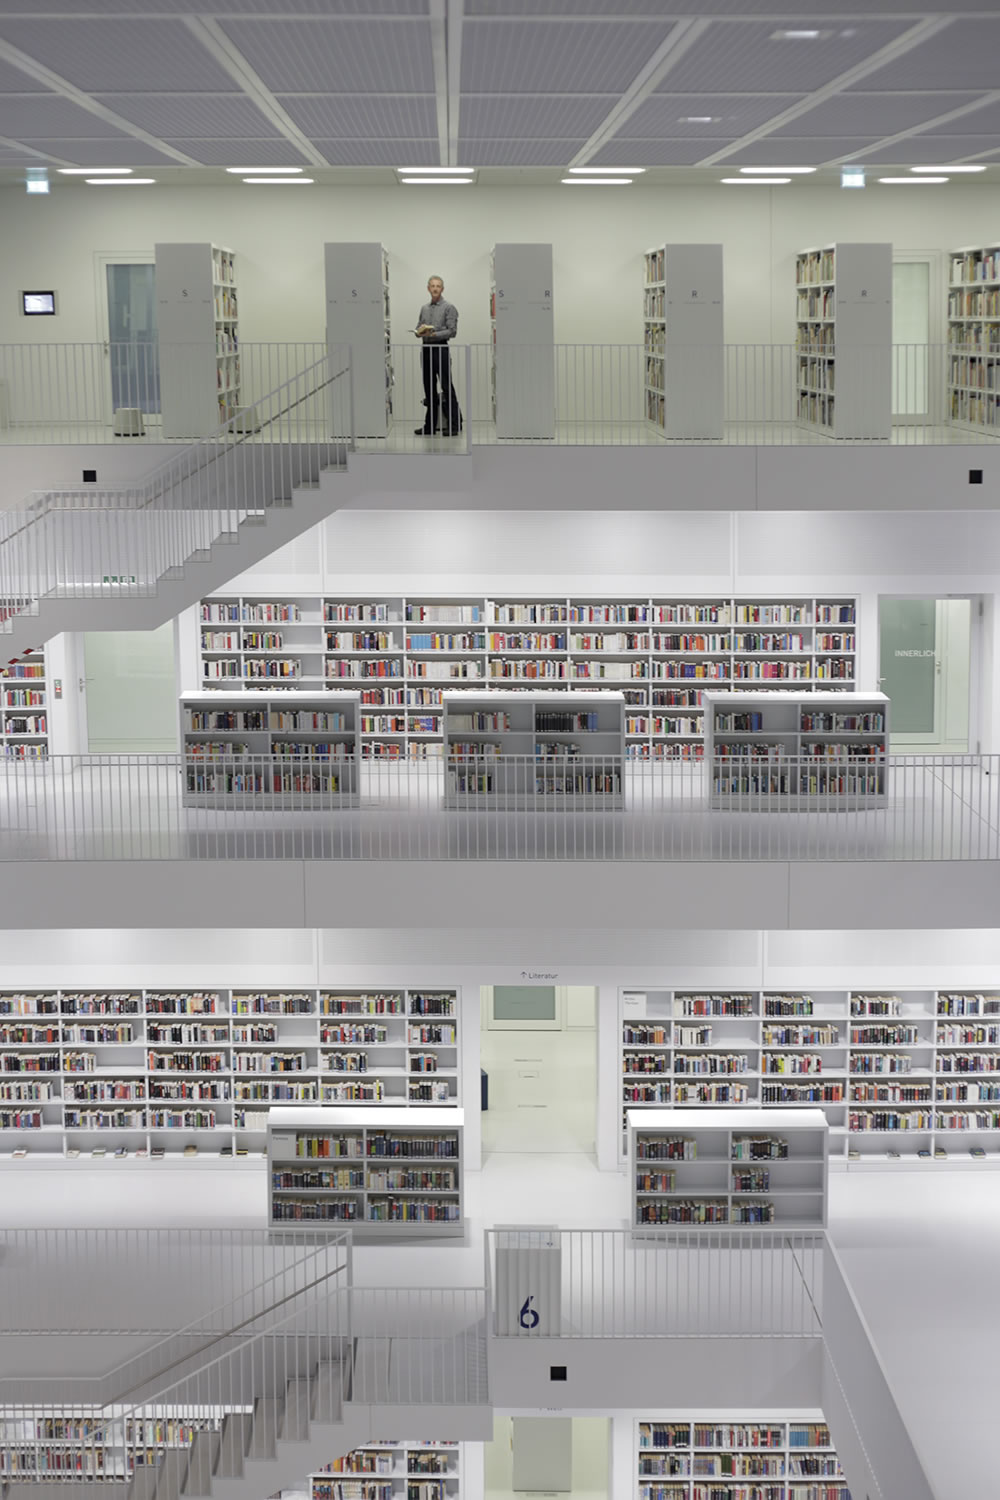 Near closing hour in Stuttgart's Municipal Library, a gorgeously harmonious piece of architecture with a 100cm x 100cm fountain in the center, by Korean architect Eun Young Yi.